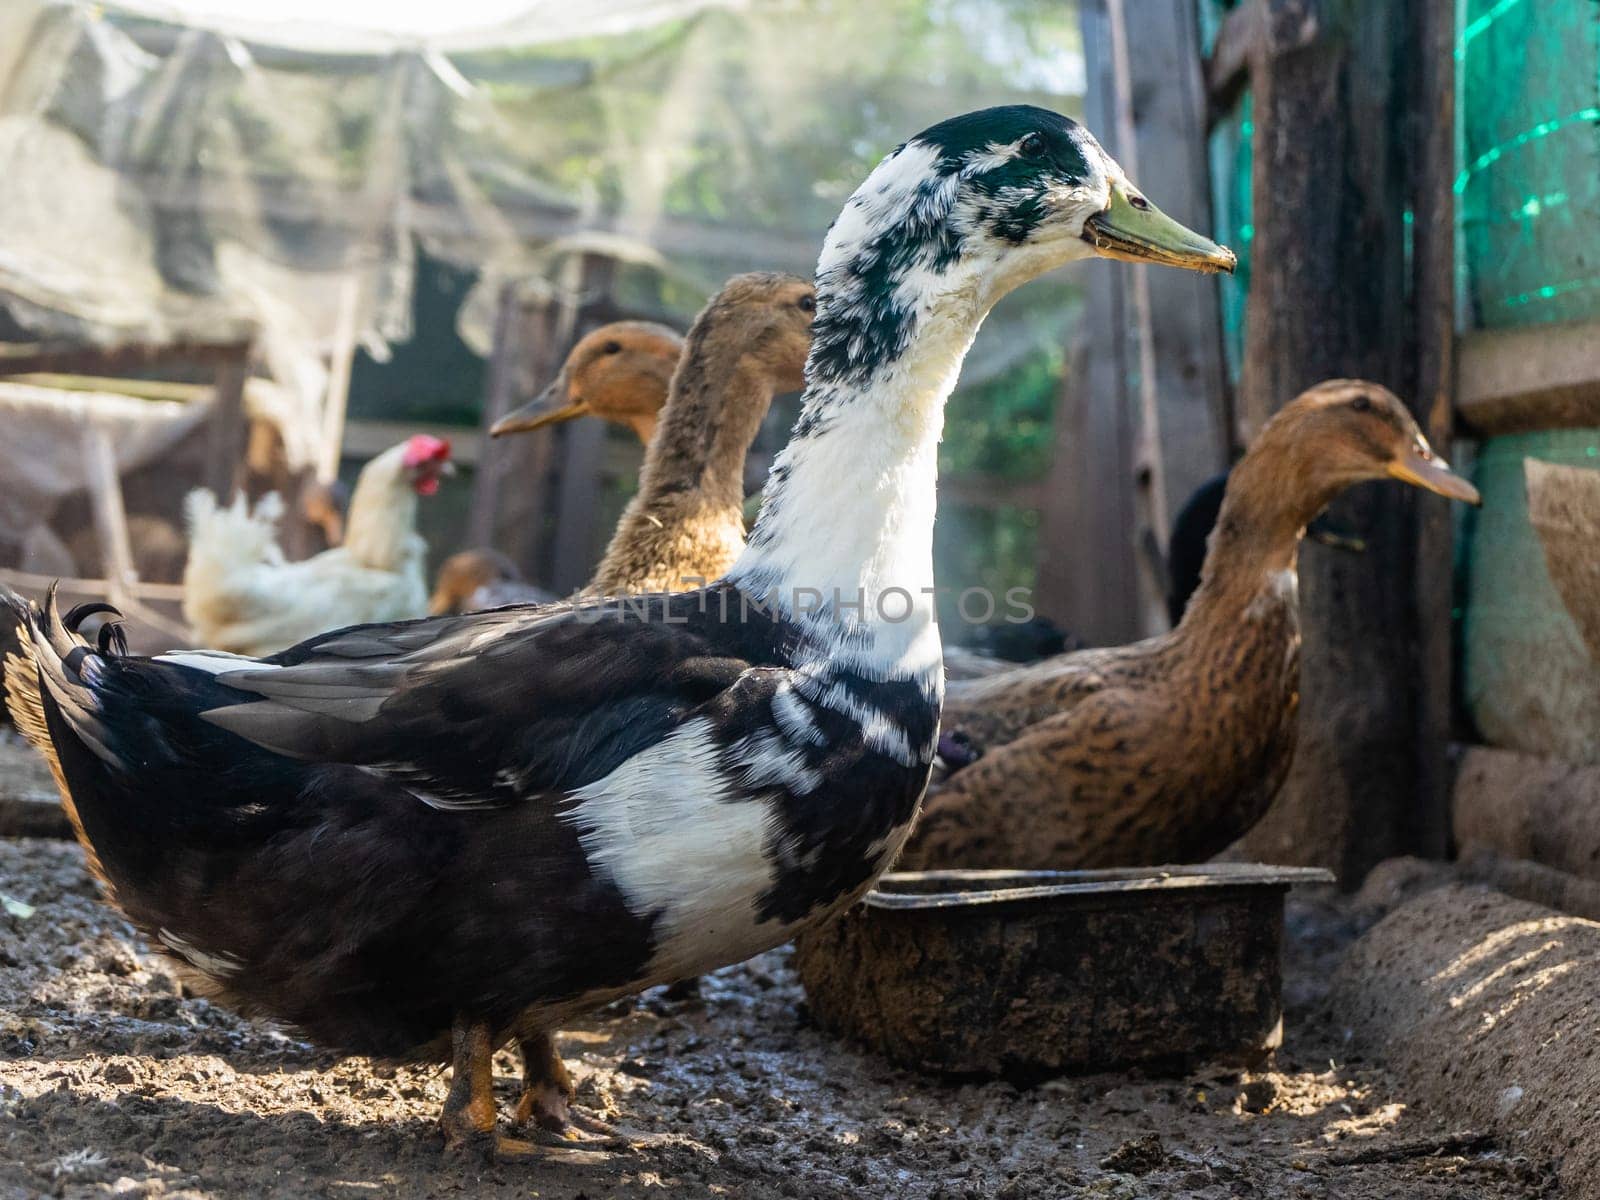 Domestic ducks in the poultry yard during feeding.